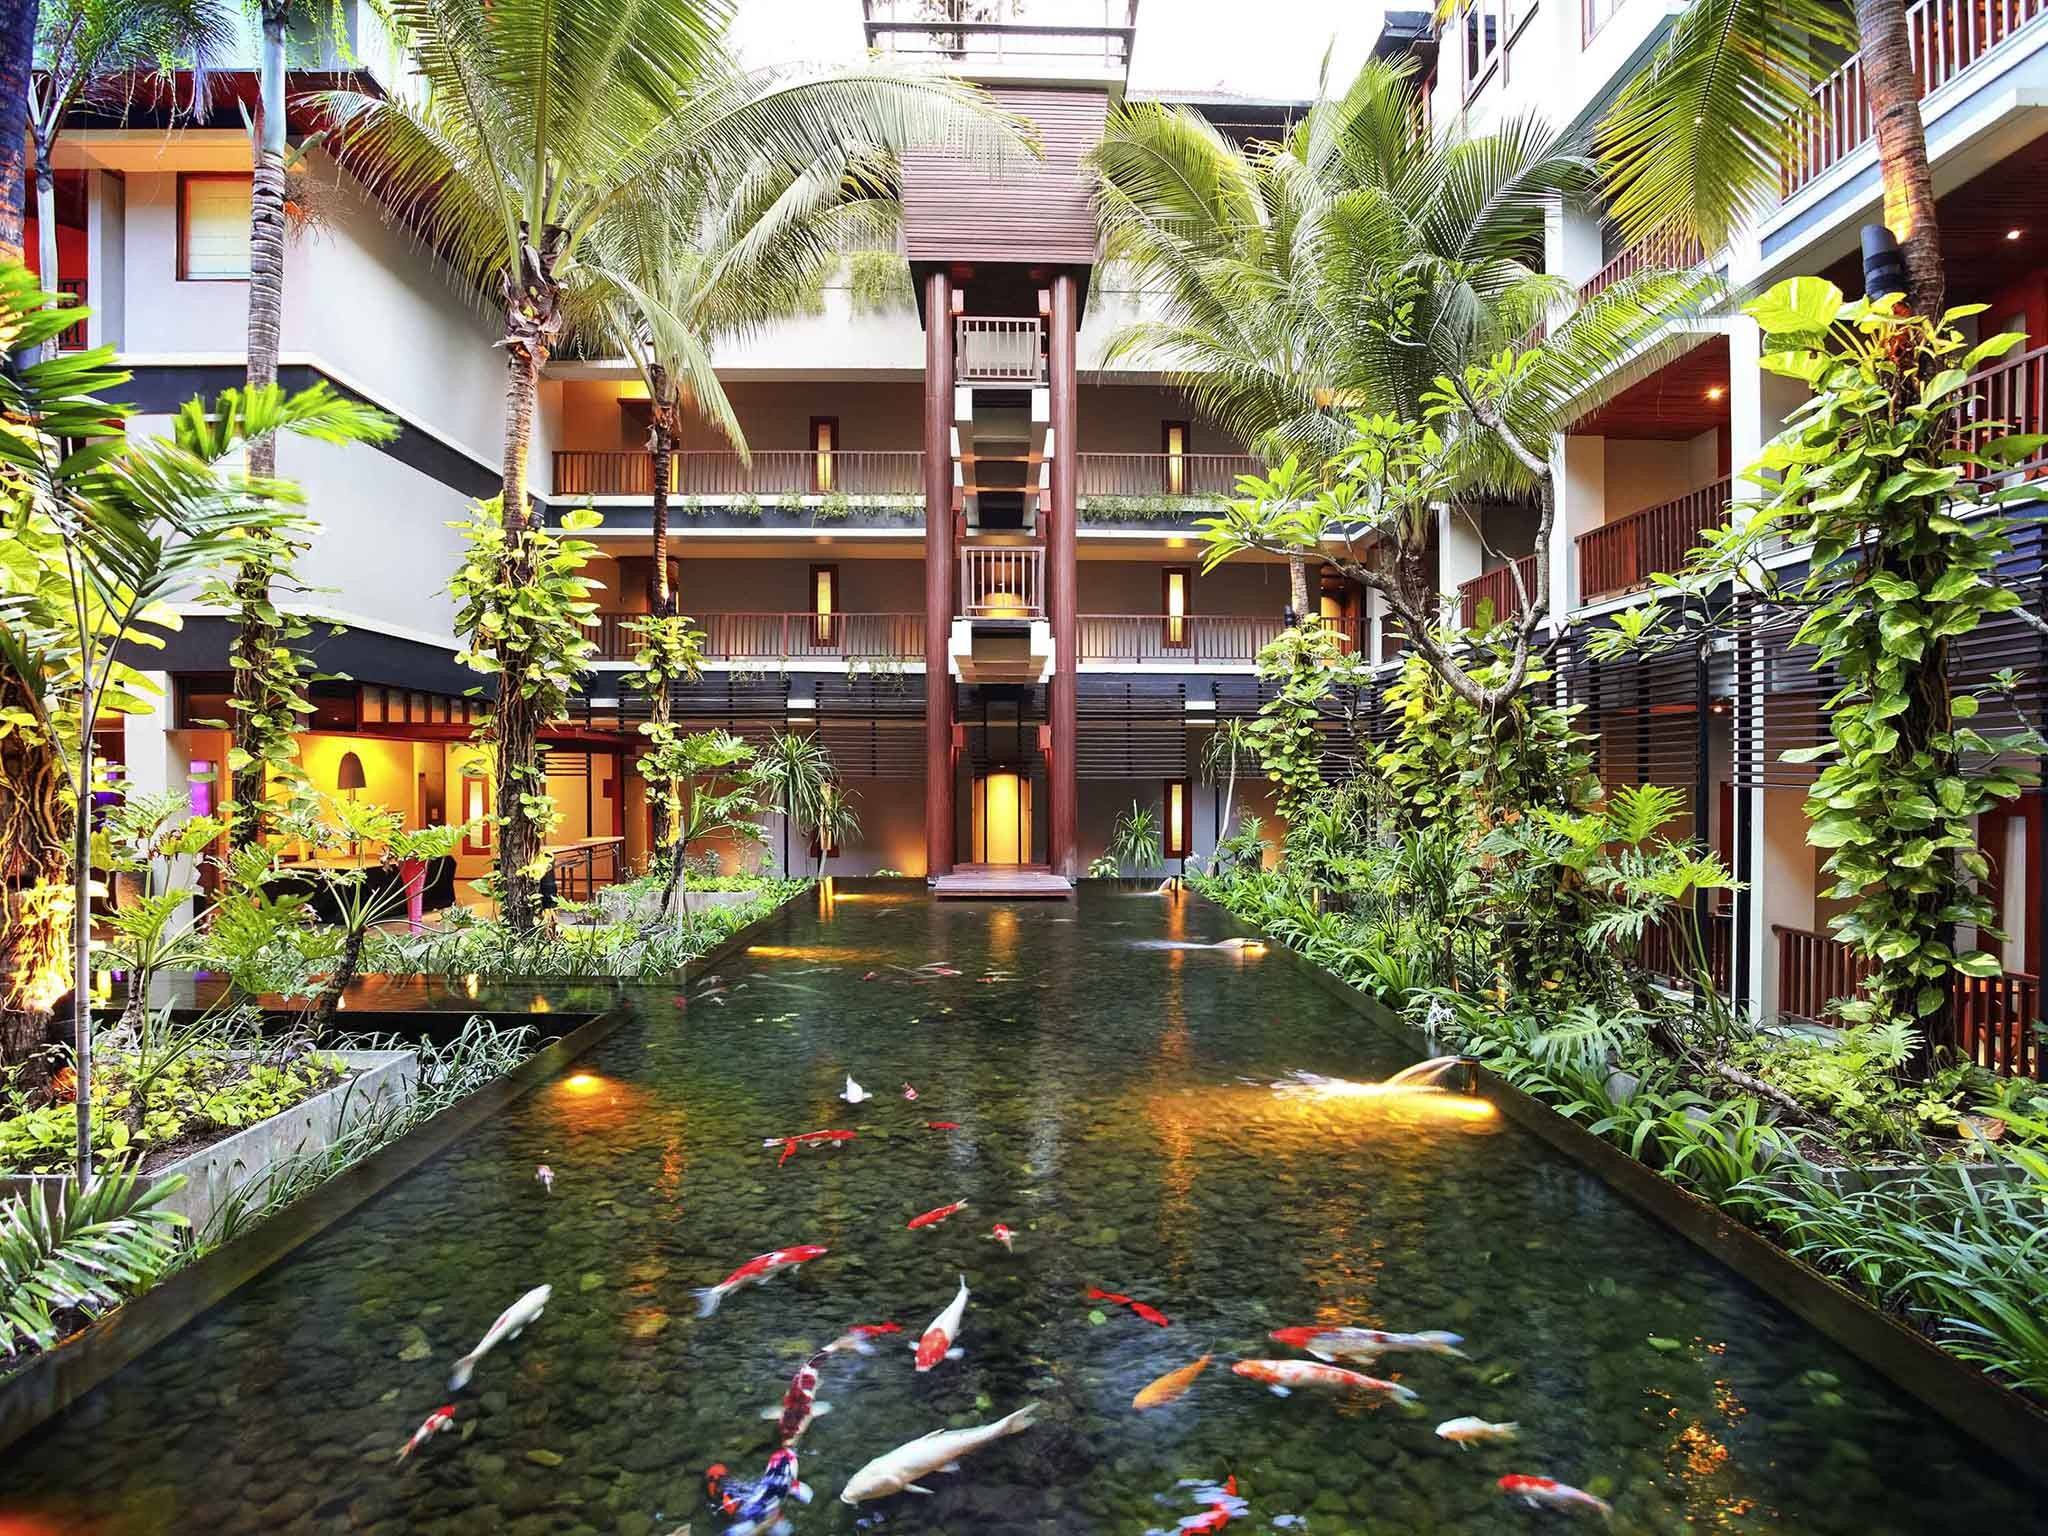 Mercure kuta bali - chse certified: 2022 pictures, reviews, prices & deals | expedia.ca